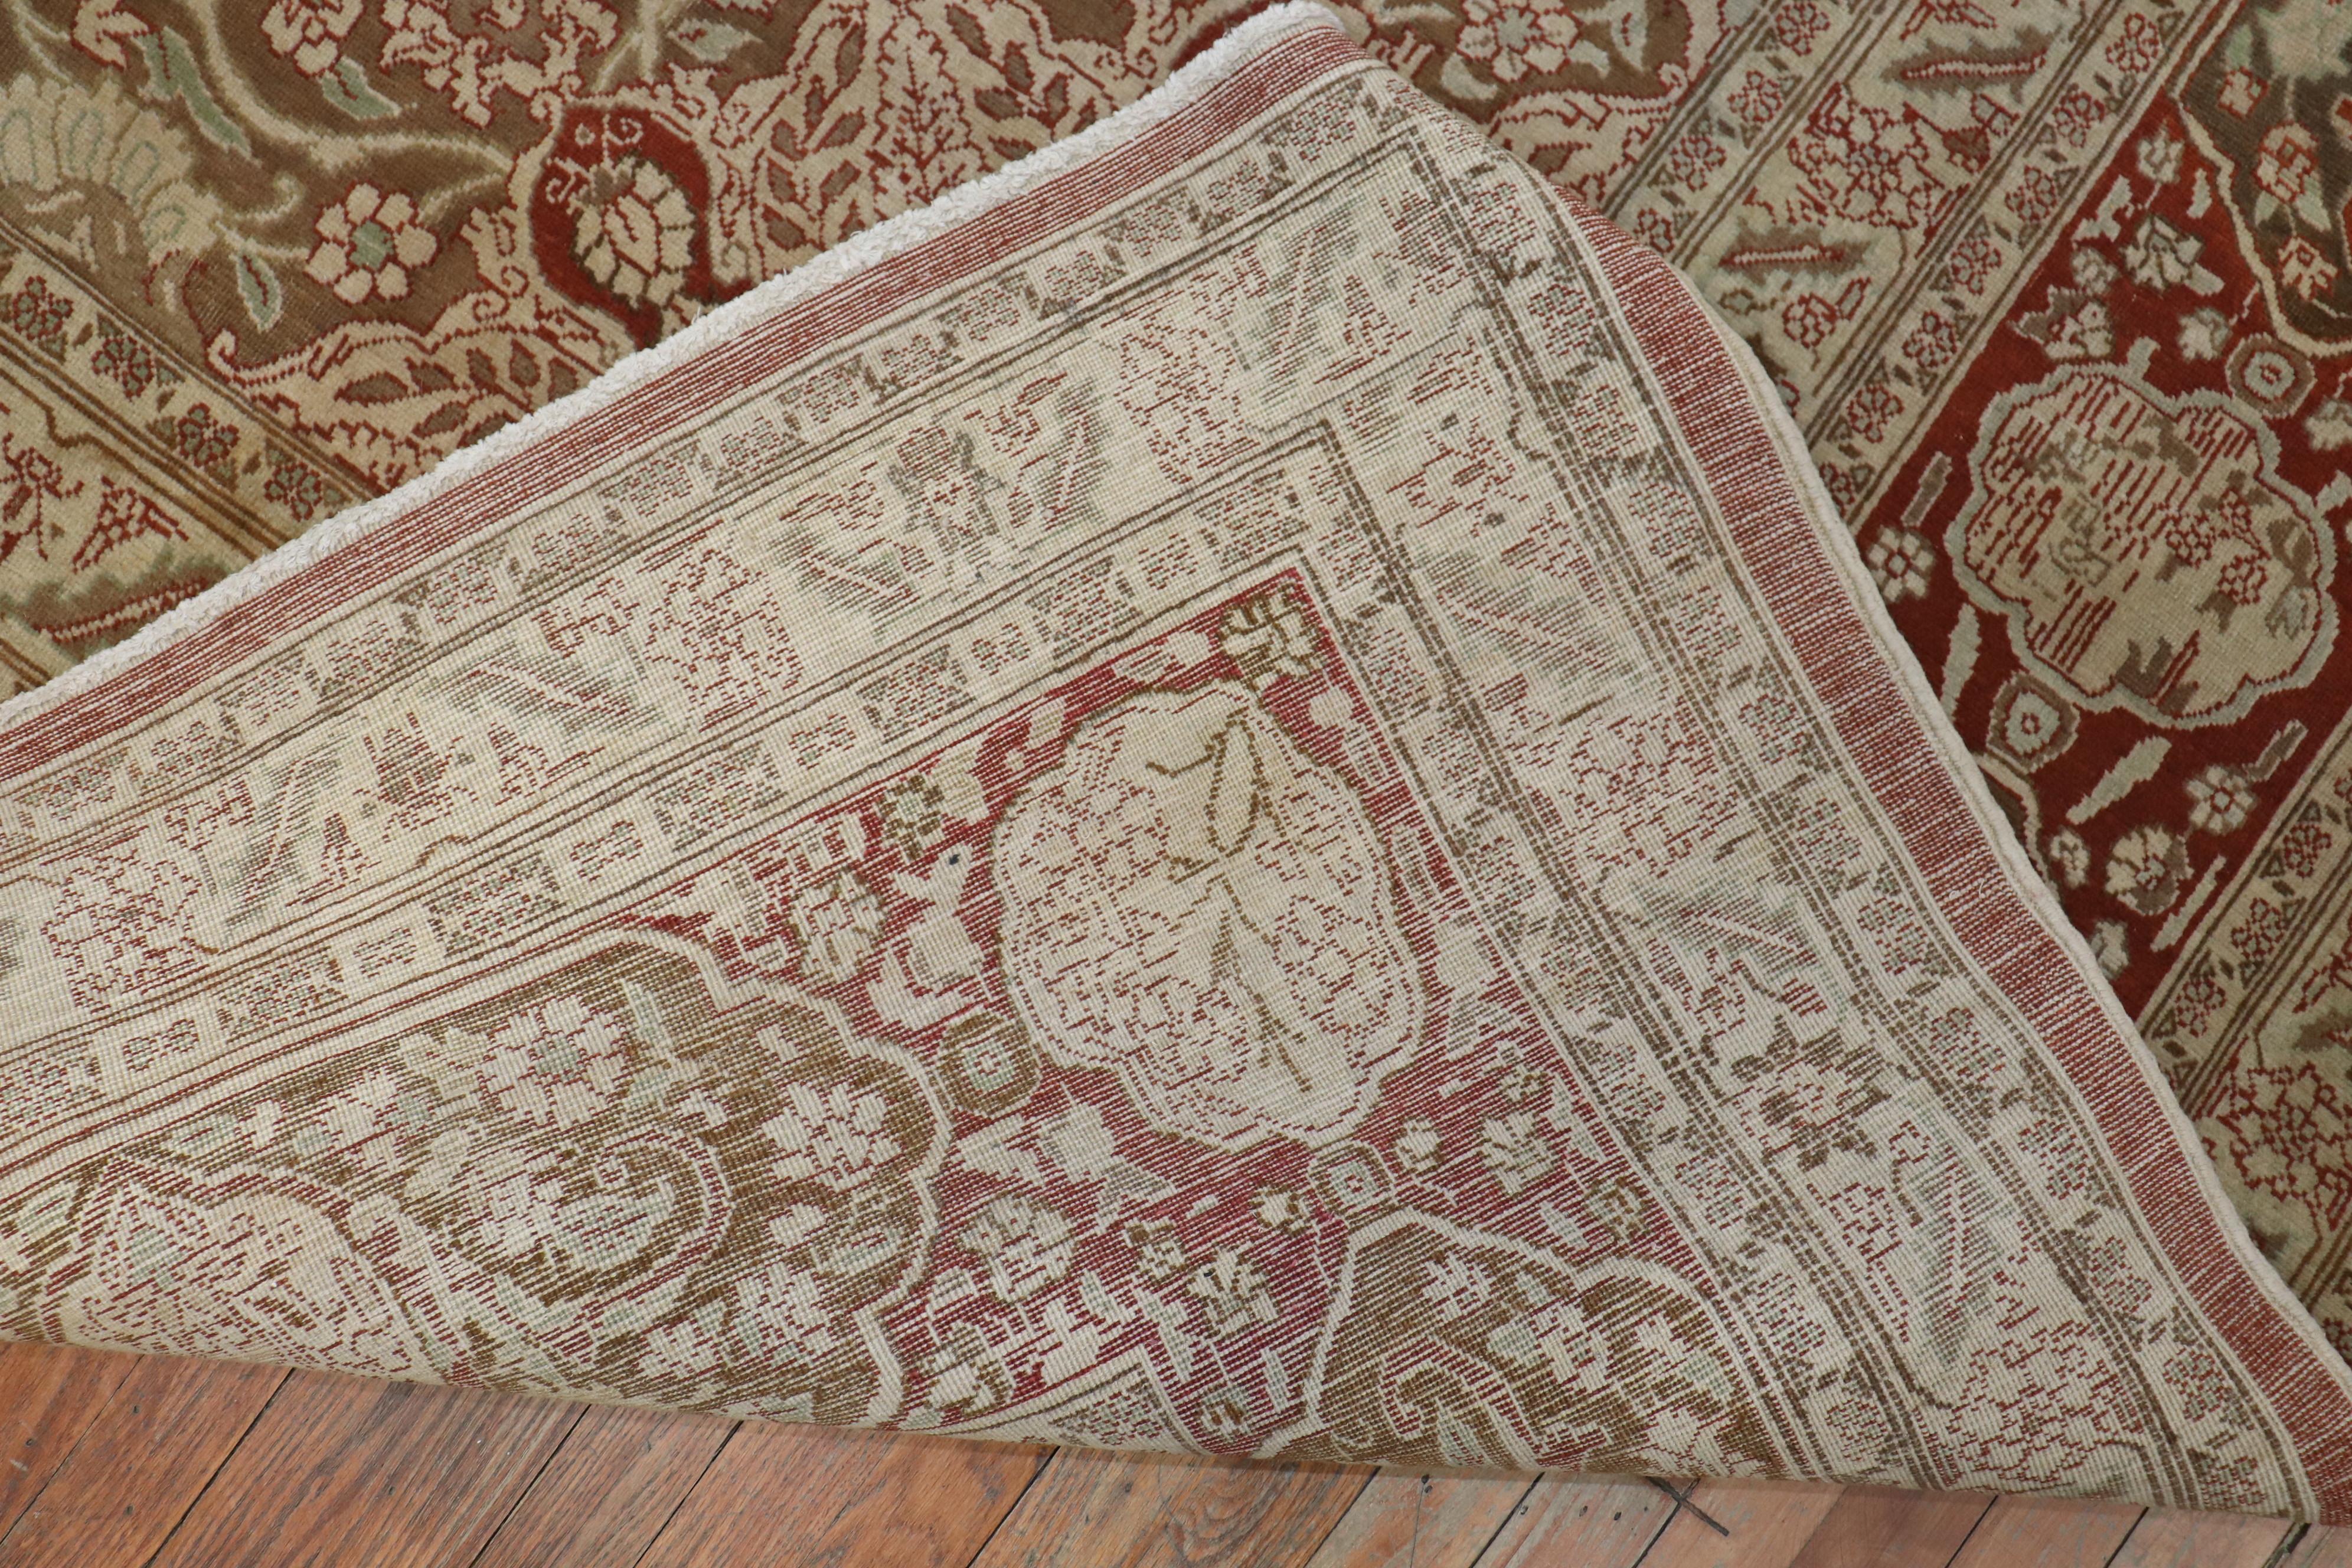 An oversize Antique Persian Tabriz rug woven early 20th century with cinnamon colored ground and soft brown medallion. The inscription pictured reads that the rug was woven in the 